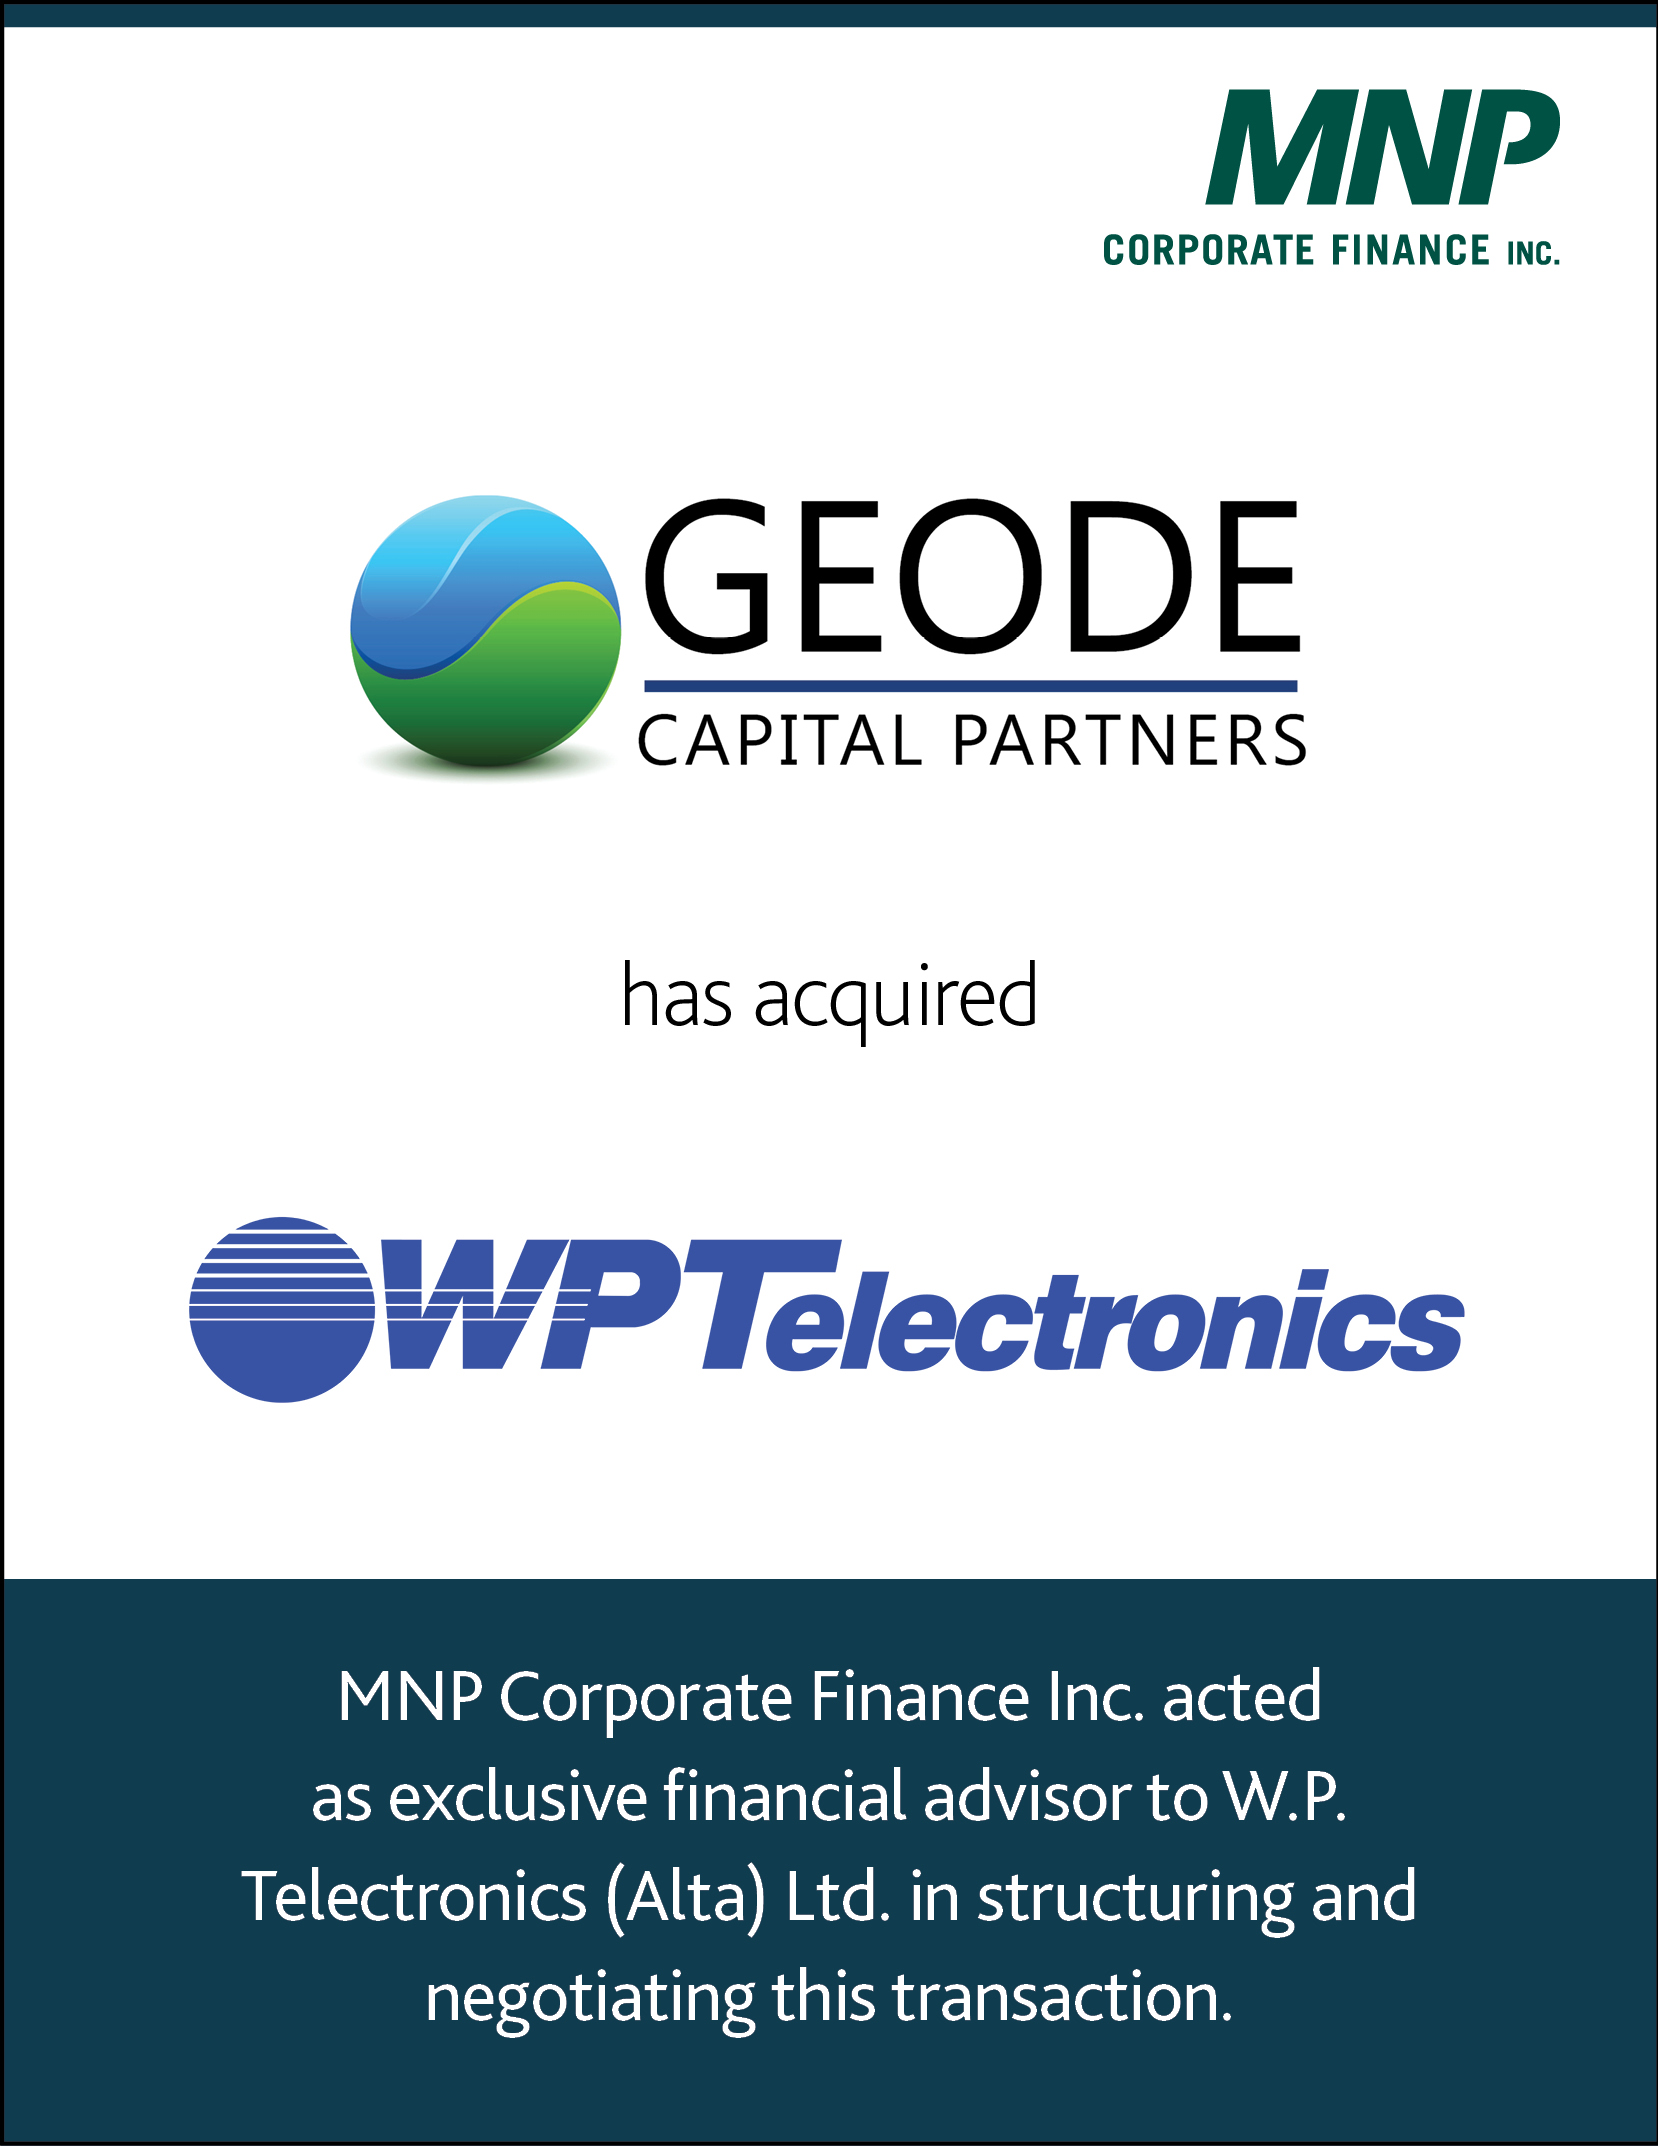 Geode Capital Partners has acquired W.P. Telectronics (Alta) Ltd.